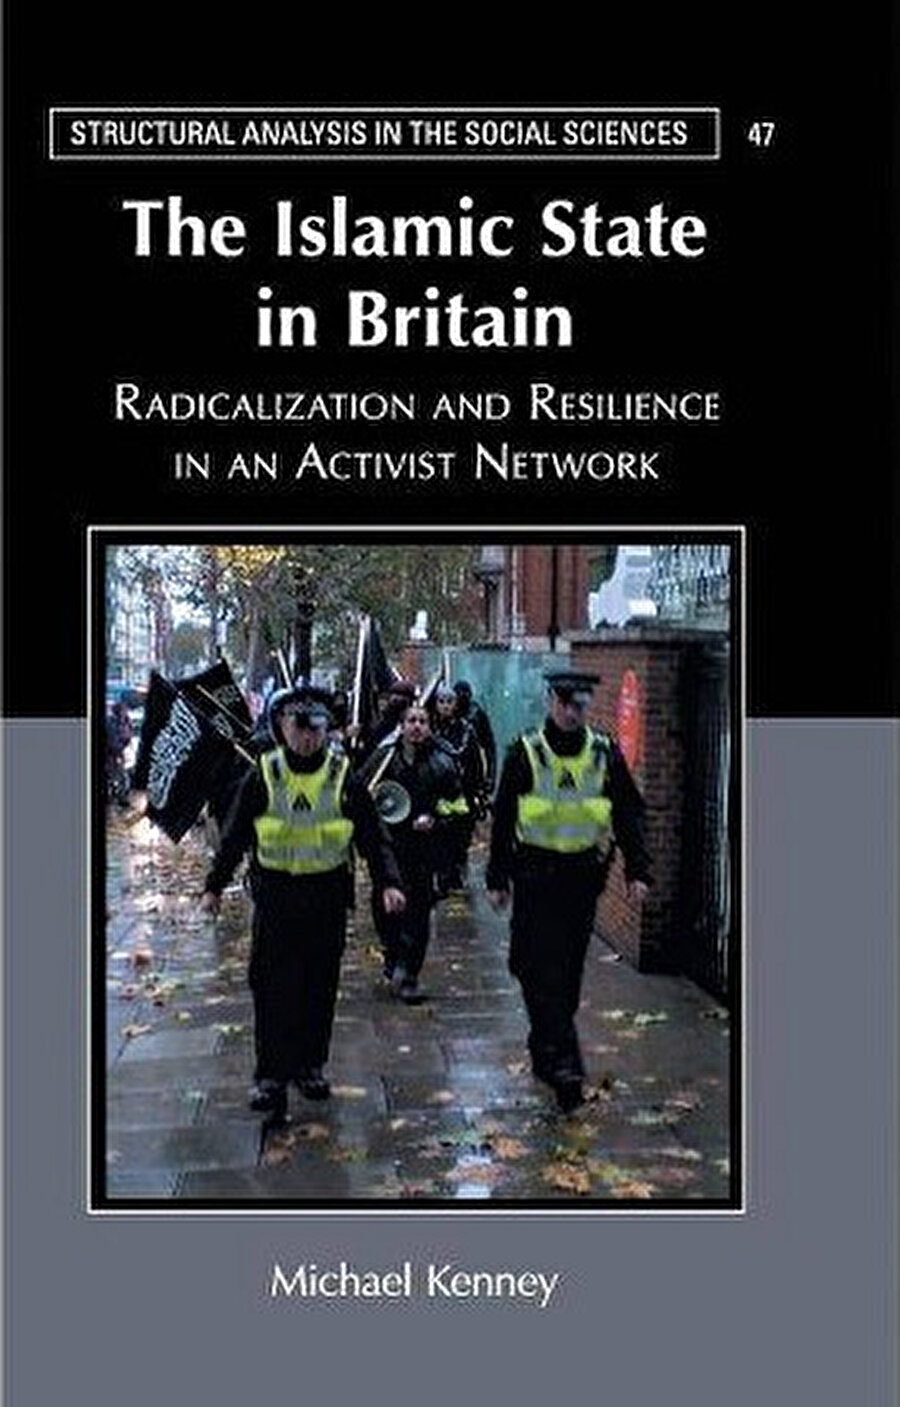 The Islamic State in Britain: Radicalization and Resilience in an Activist Network,Michael Kenney, Cambridge University Press